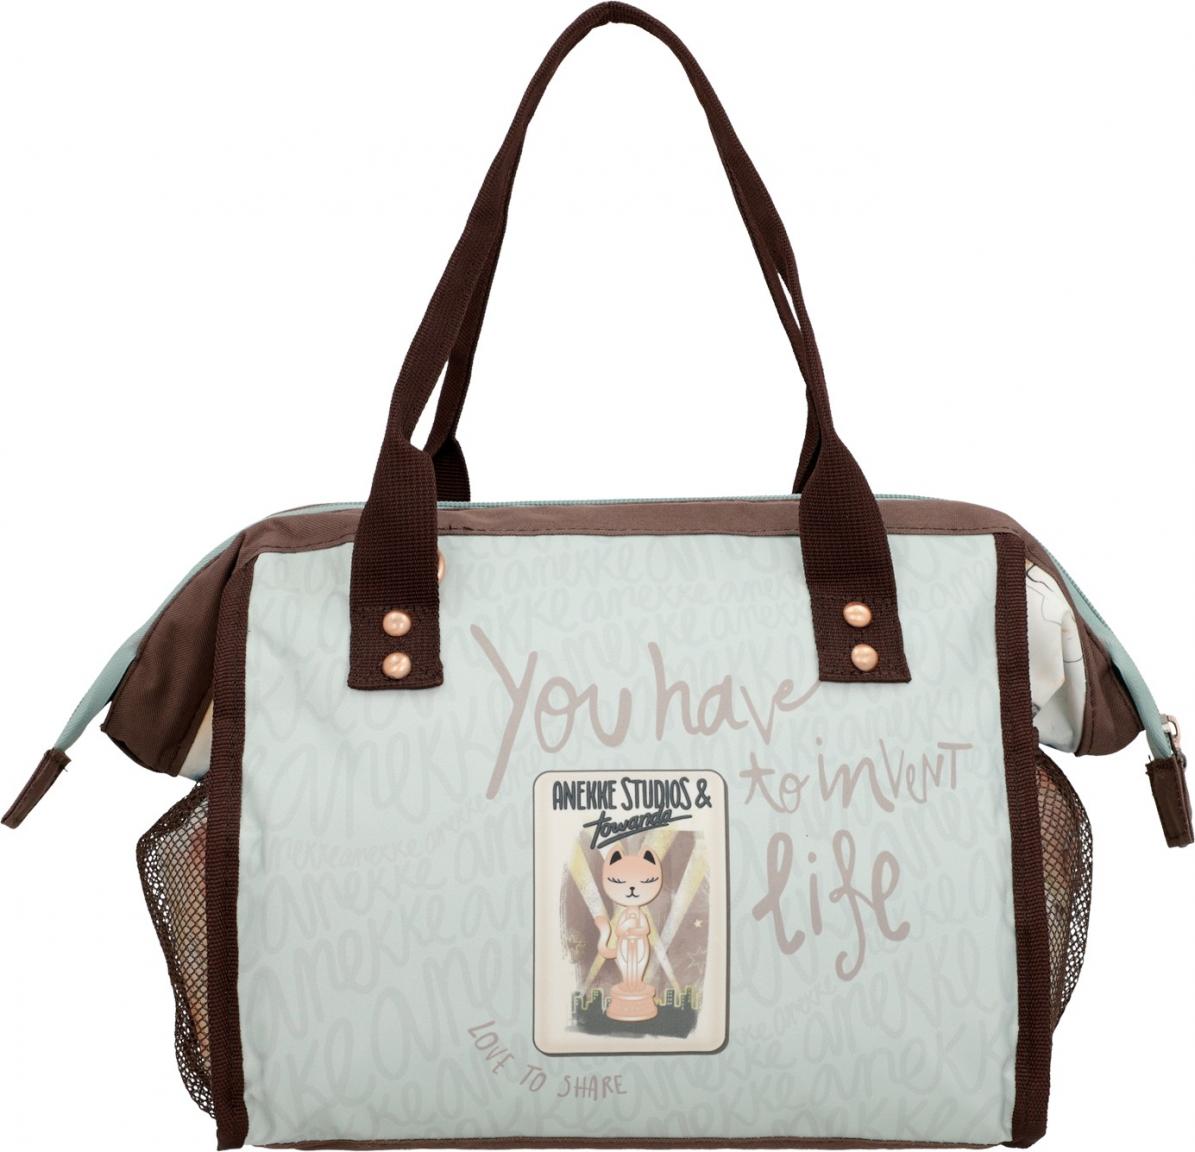 Picknicktasche isolierend Hollywood Diva Anekke